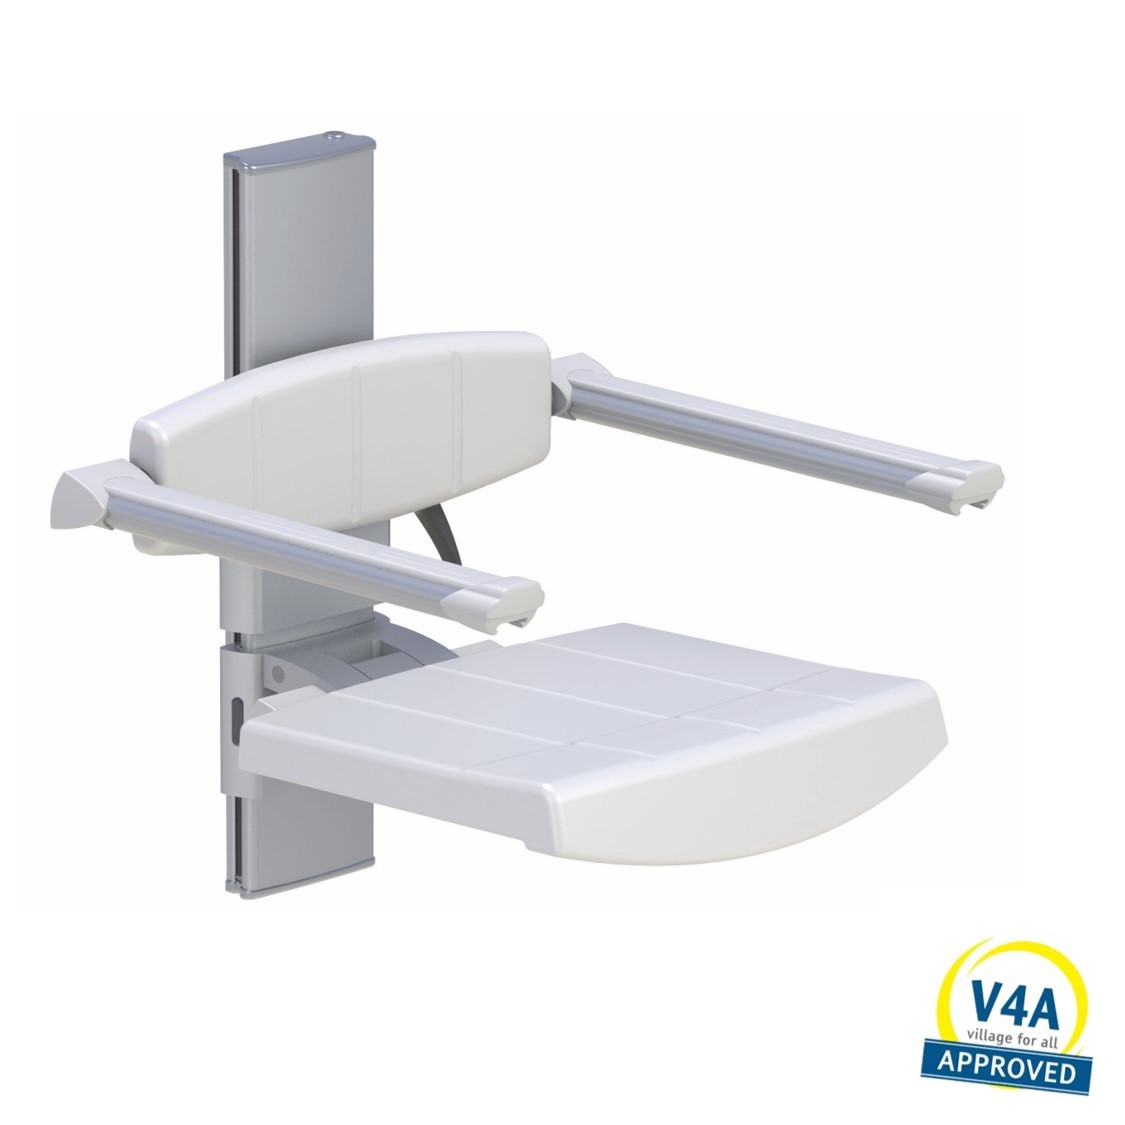 Wall mounted shower seat with backrest & armrest, height adjustable